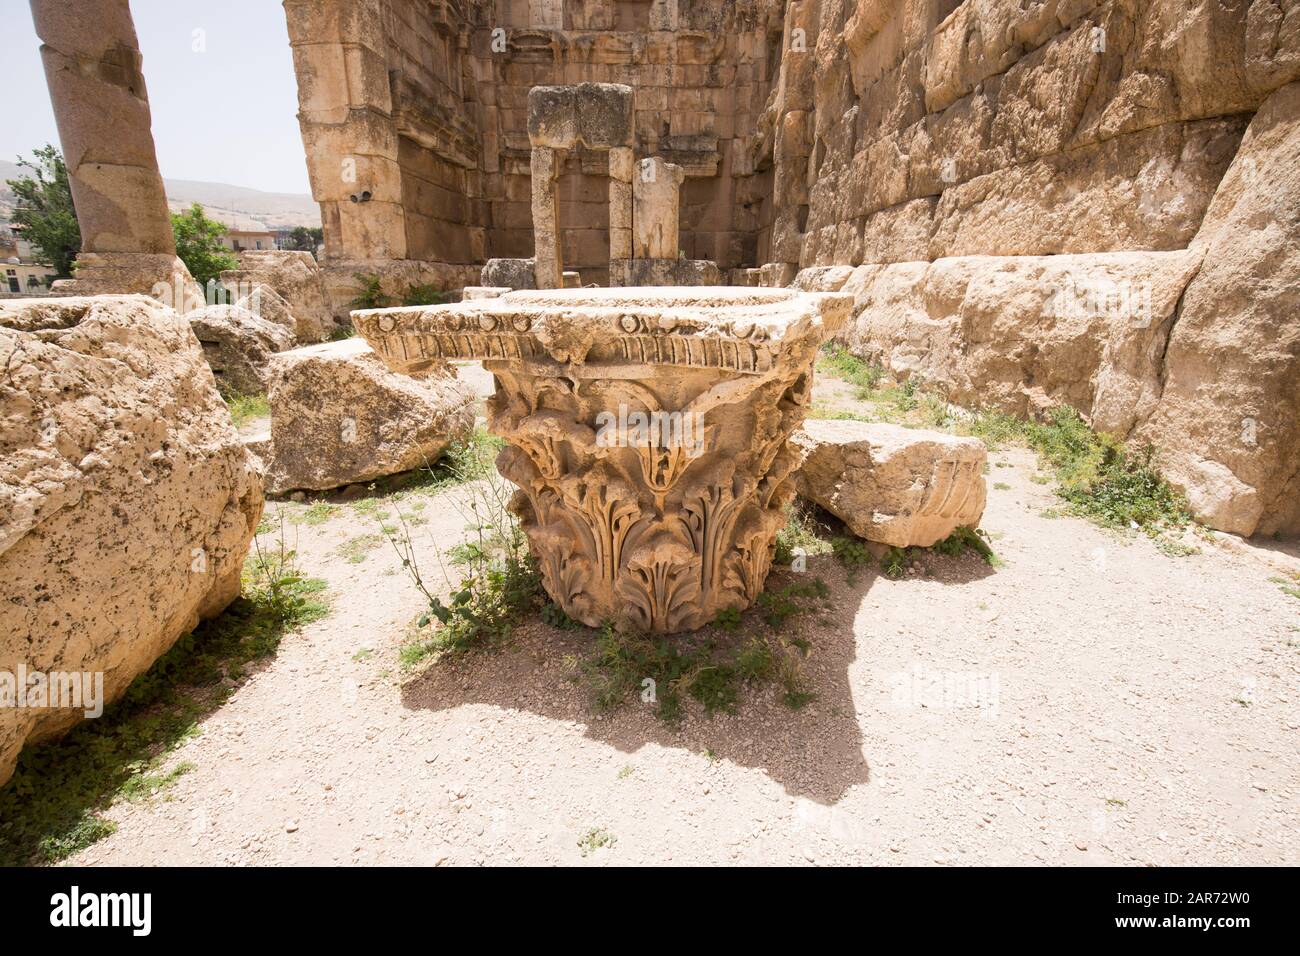 The capital of a column in the Propylaeae. The ruins of the Roman city of Heliopolis or Baalbek in the Beqaa Valley. Baalbek, Lebanon - June, 2019 Stock Photo